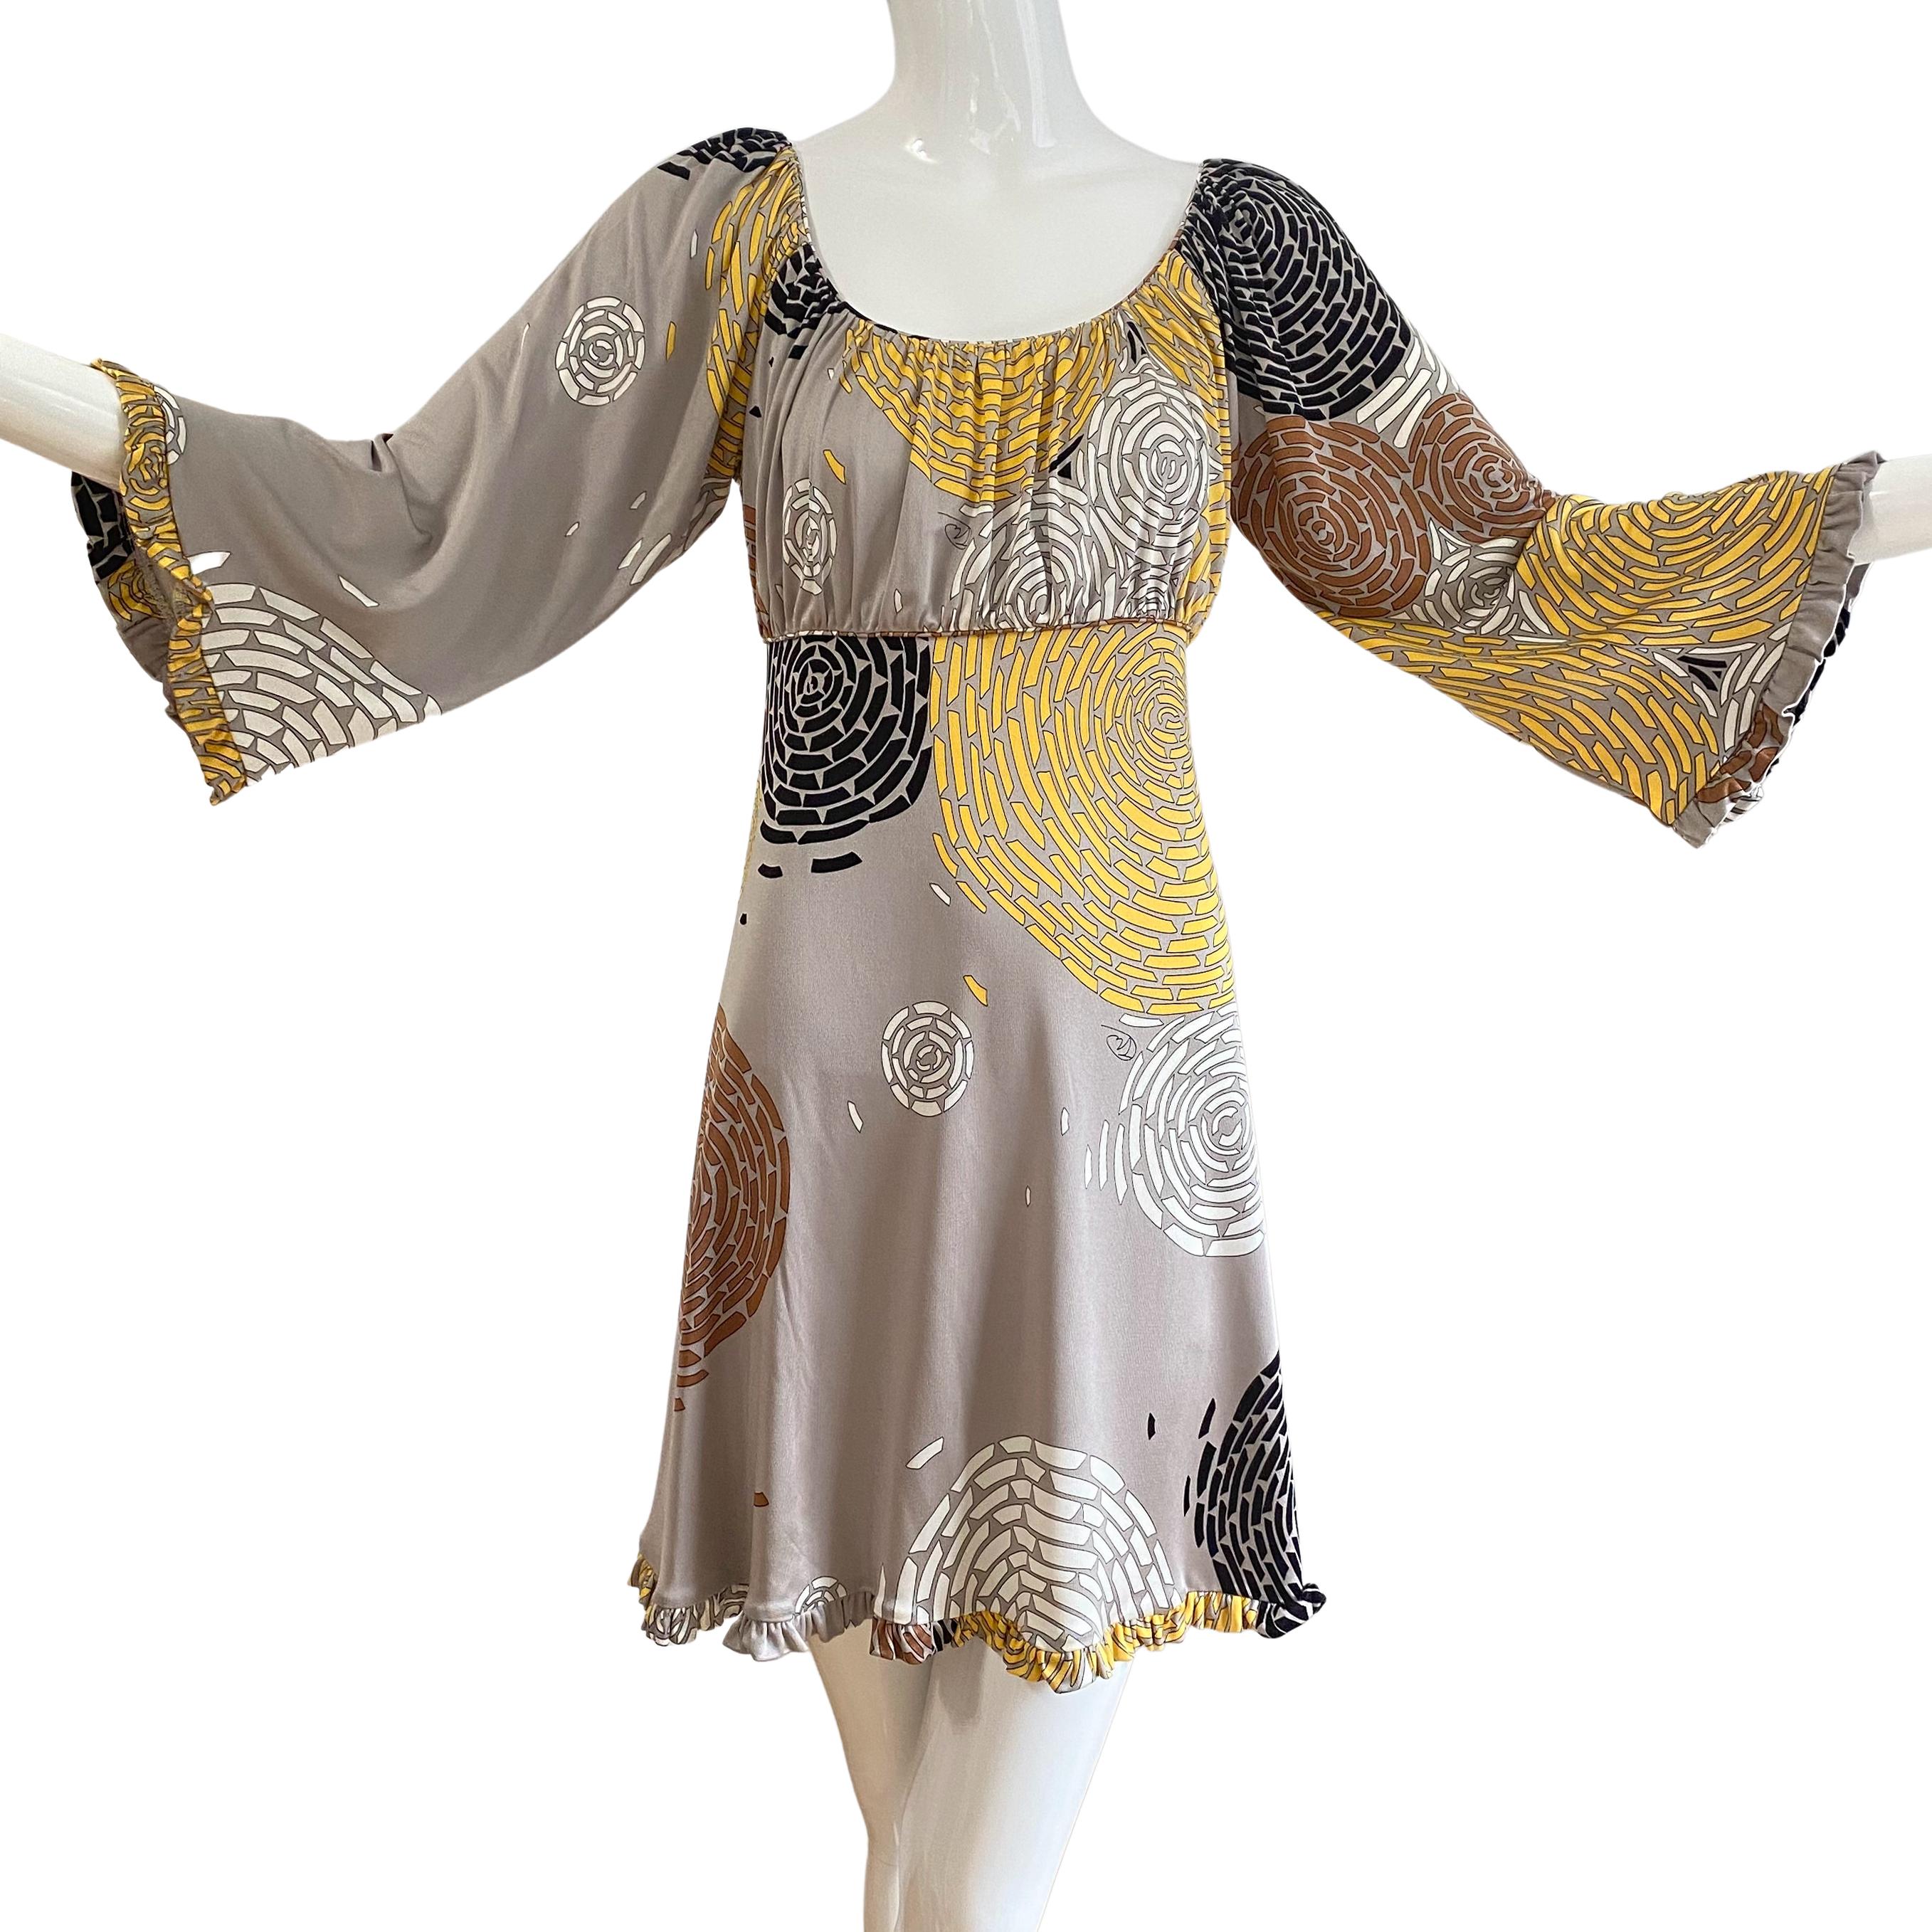 Generous shirred bust, ruffle at 3/4 bell sleeves and flared skirt.
Ties front or back for a perfect fit.
In Flora's hand-signed, stylized chrysanthemum print. 
One of Flora's favorite dresses!
Approximately 36